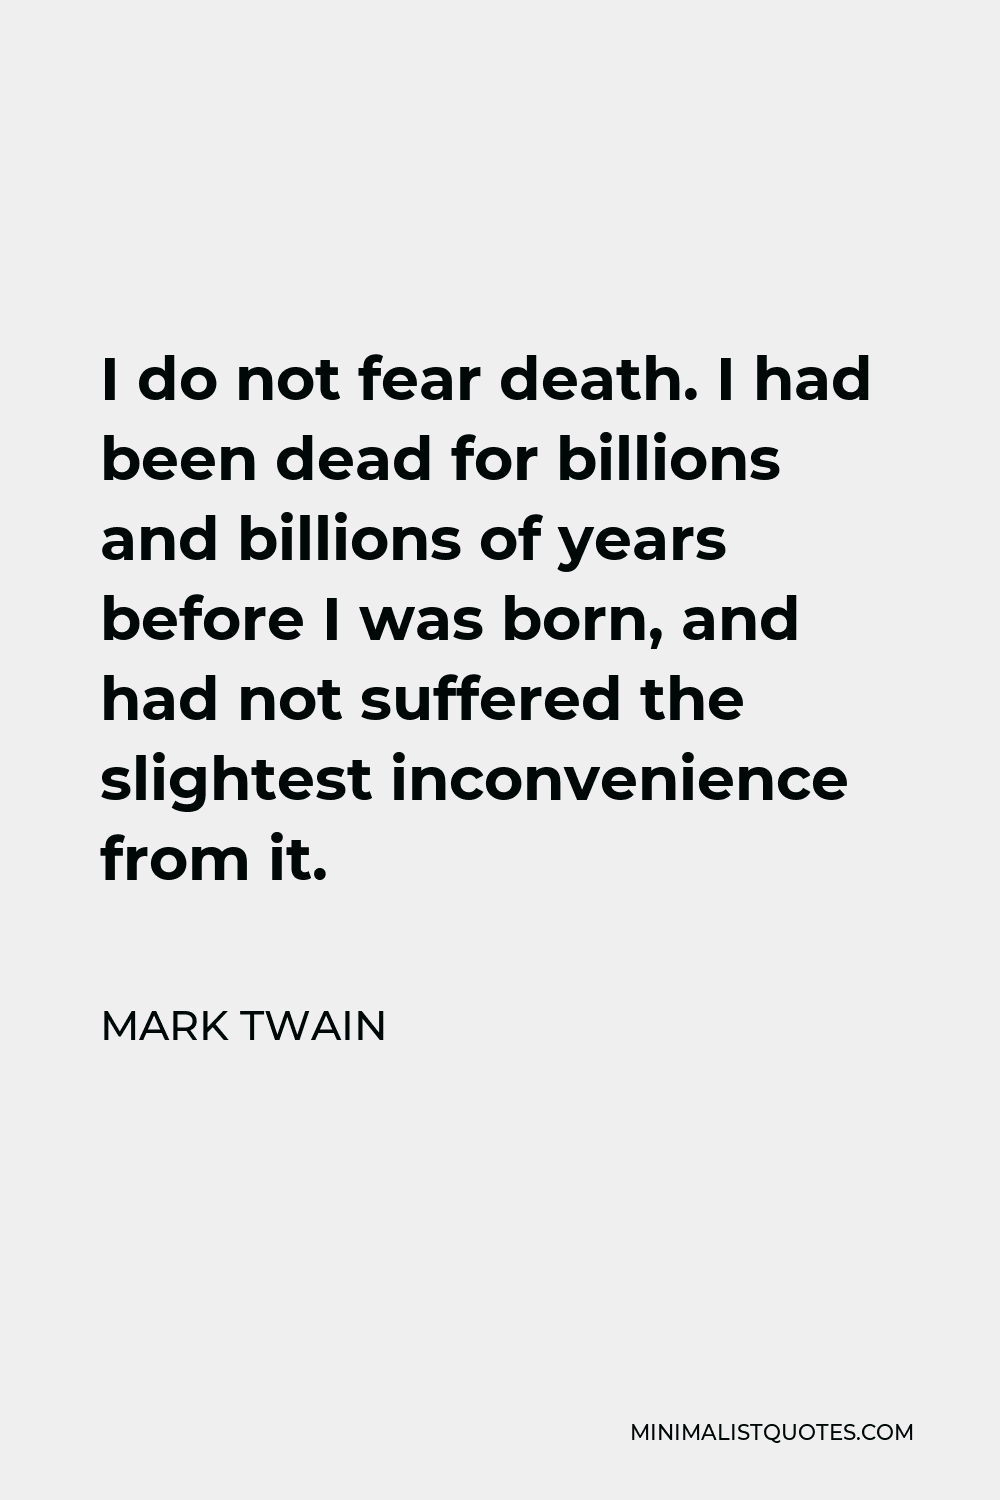 Mark Twain Quote - I do not fear death. I had been dead for billions and billions of years before I was born, and had not suffered the slightest inconvenience from it.